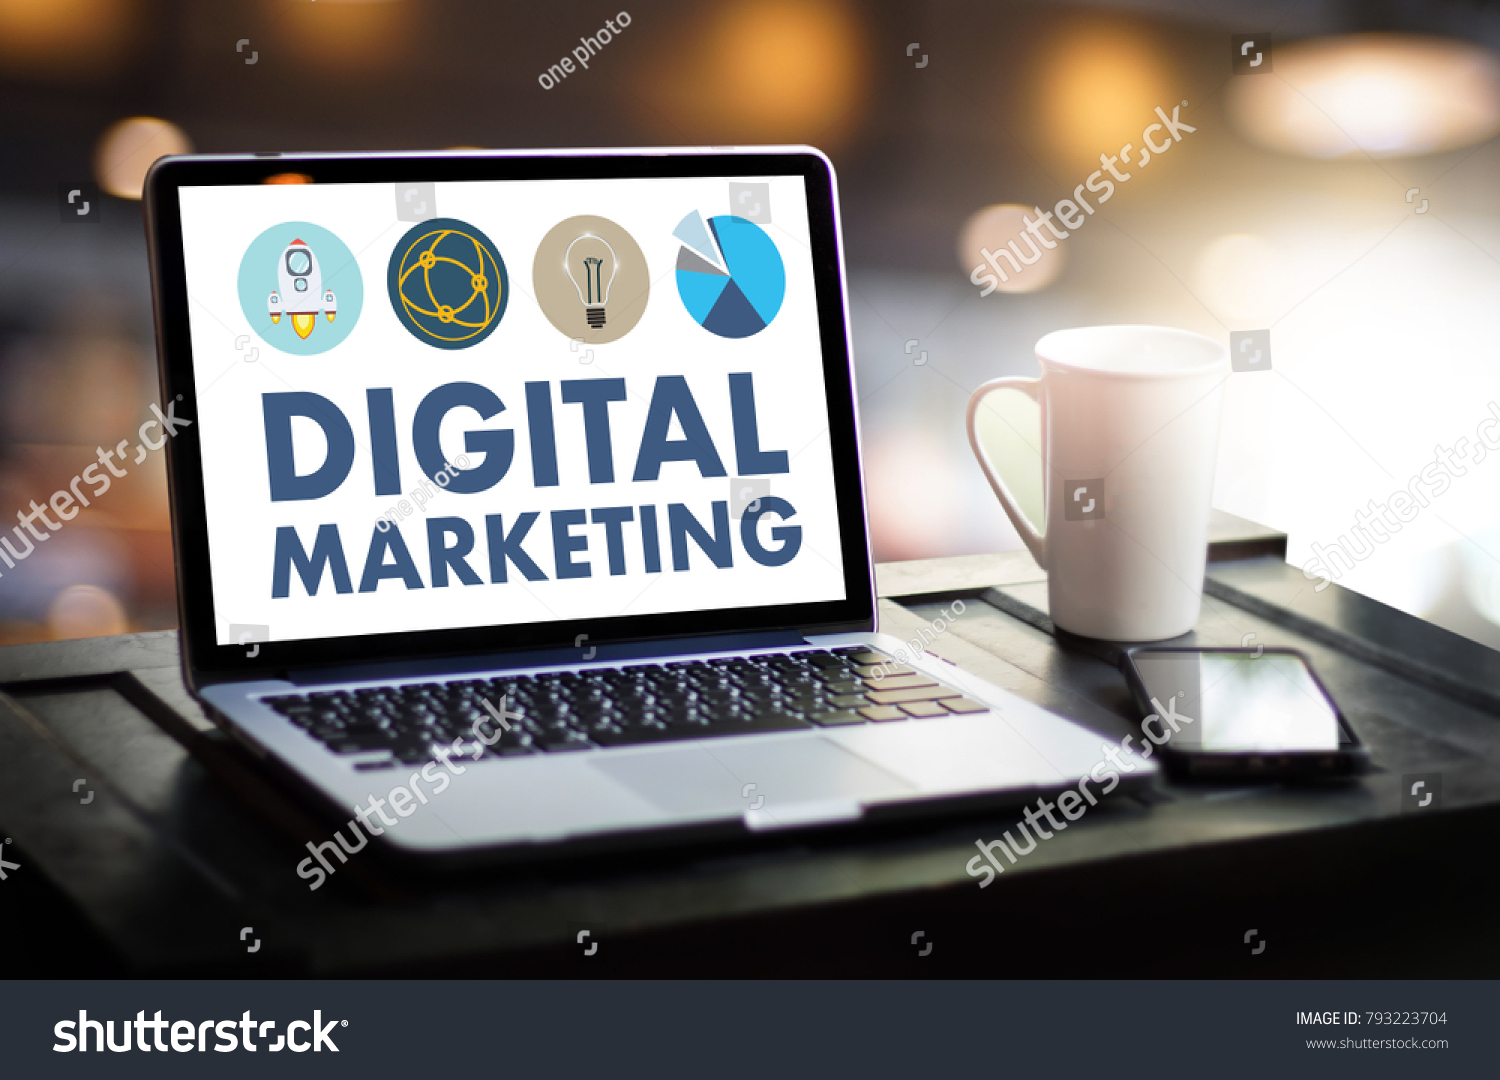 DIGITAL MARKETING new startup project MILLENNIALS Business team hands at work with financial reports and a laptop #793223704